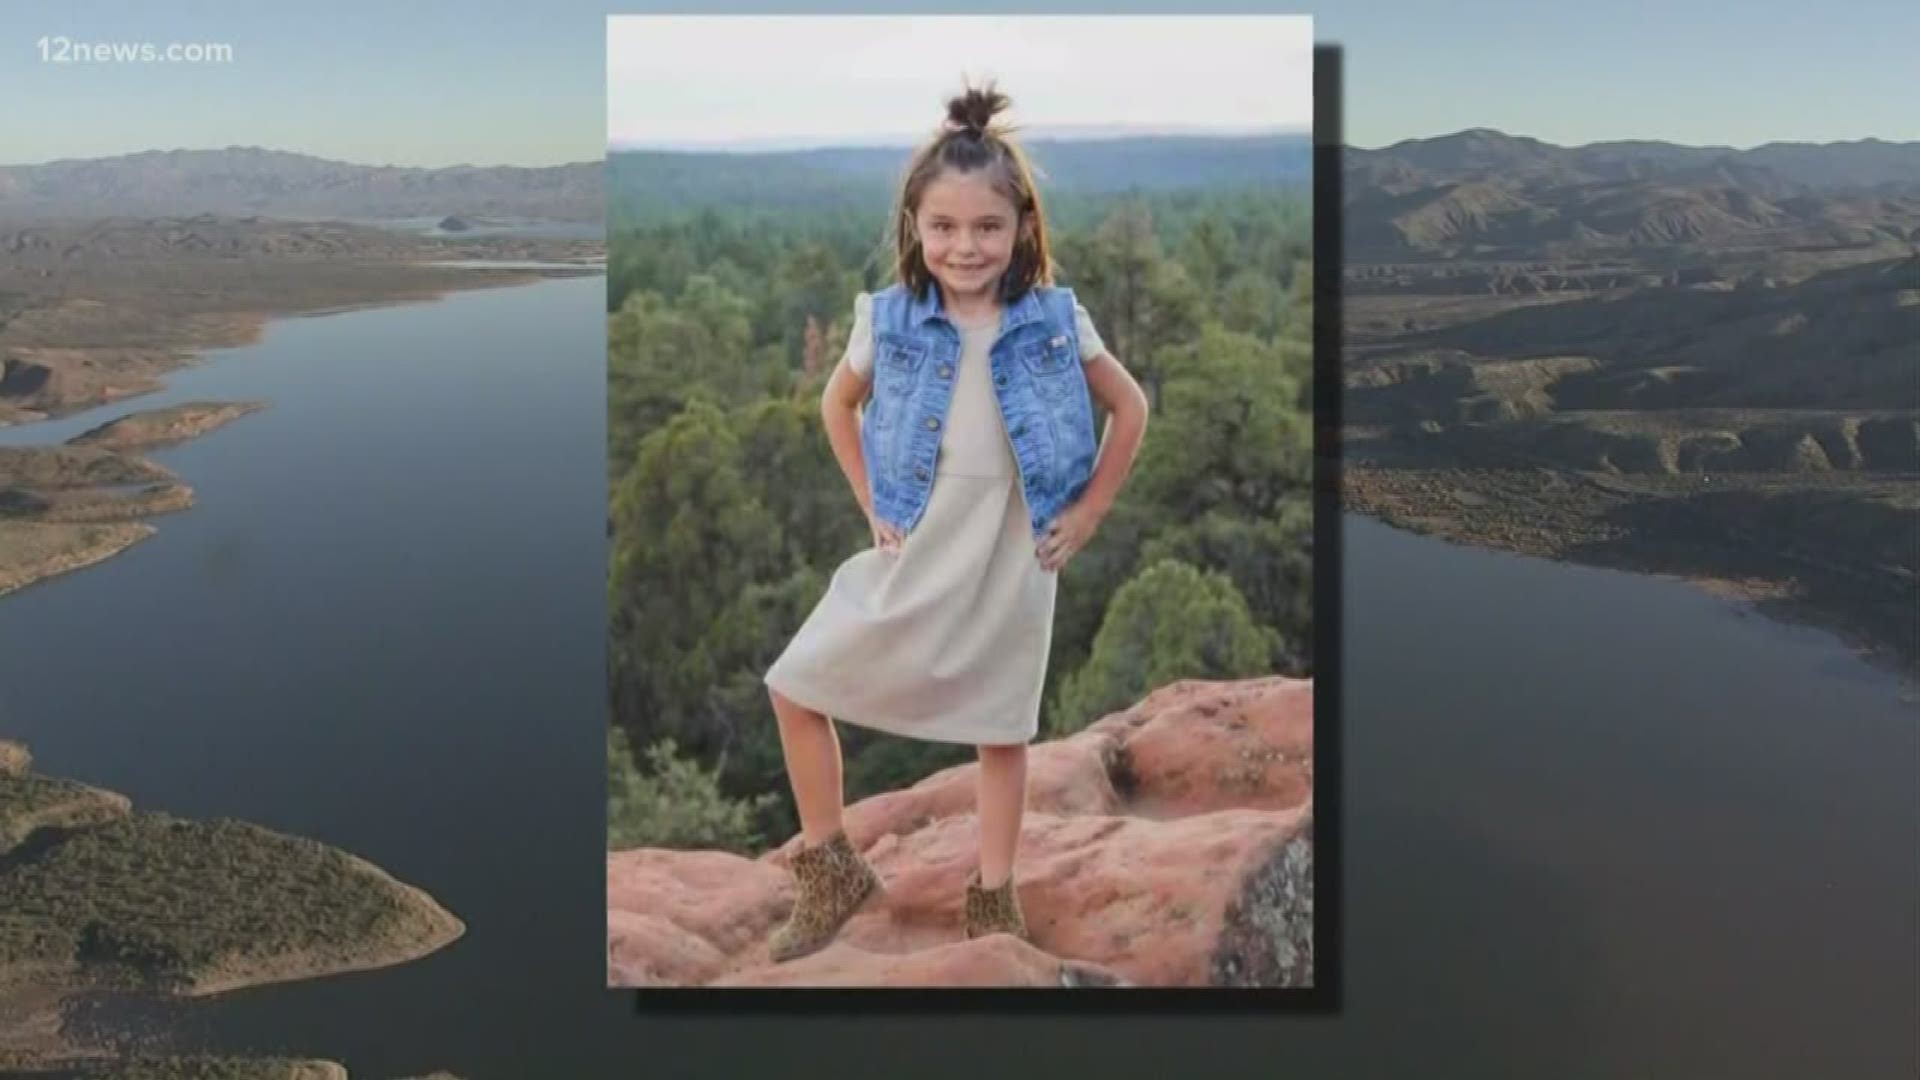 The sheriff's office confirmed the body found this afternoon is 6-year-old Willa Rawlings.